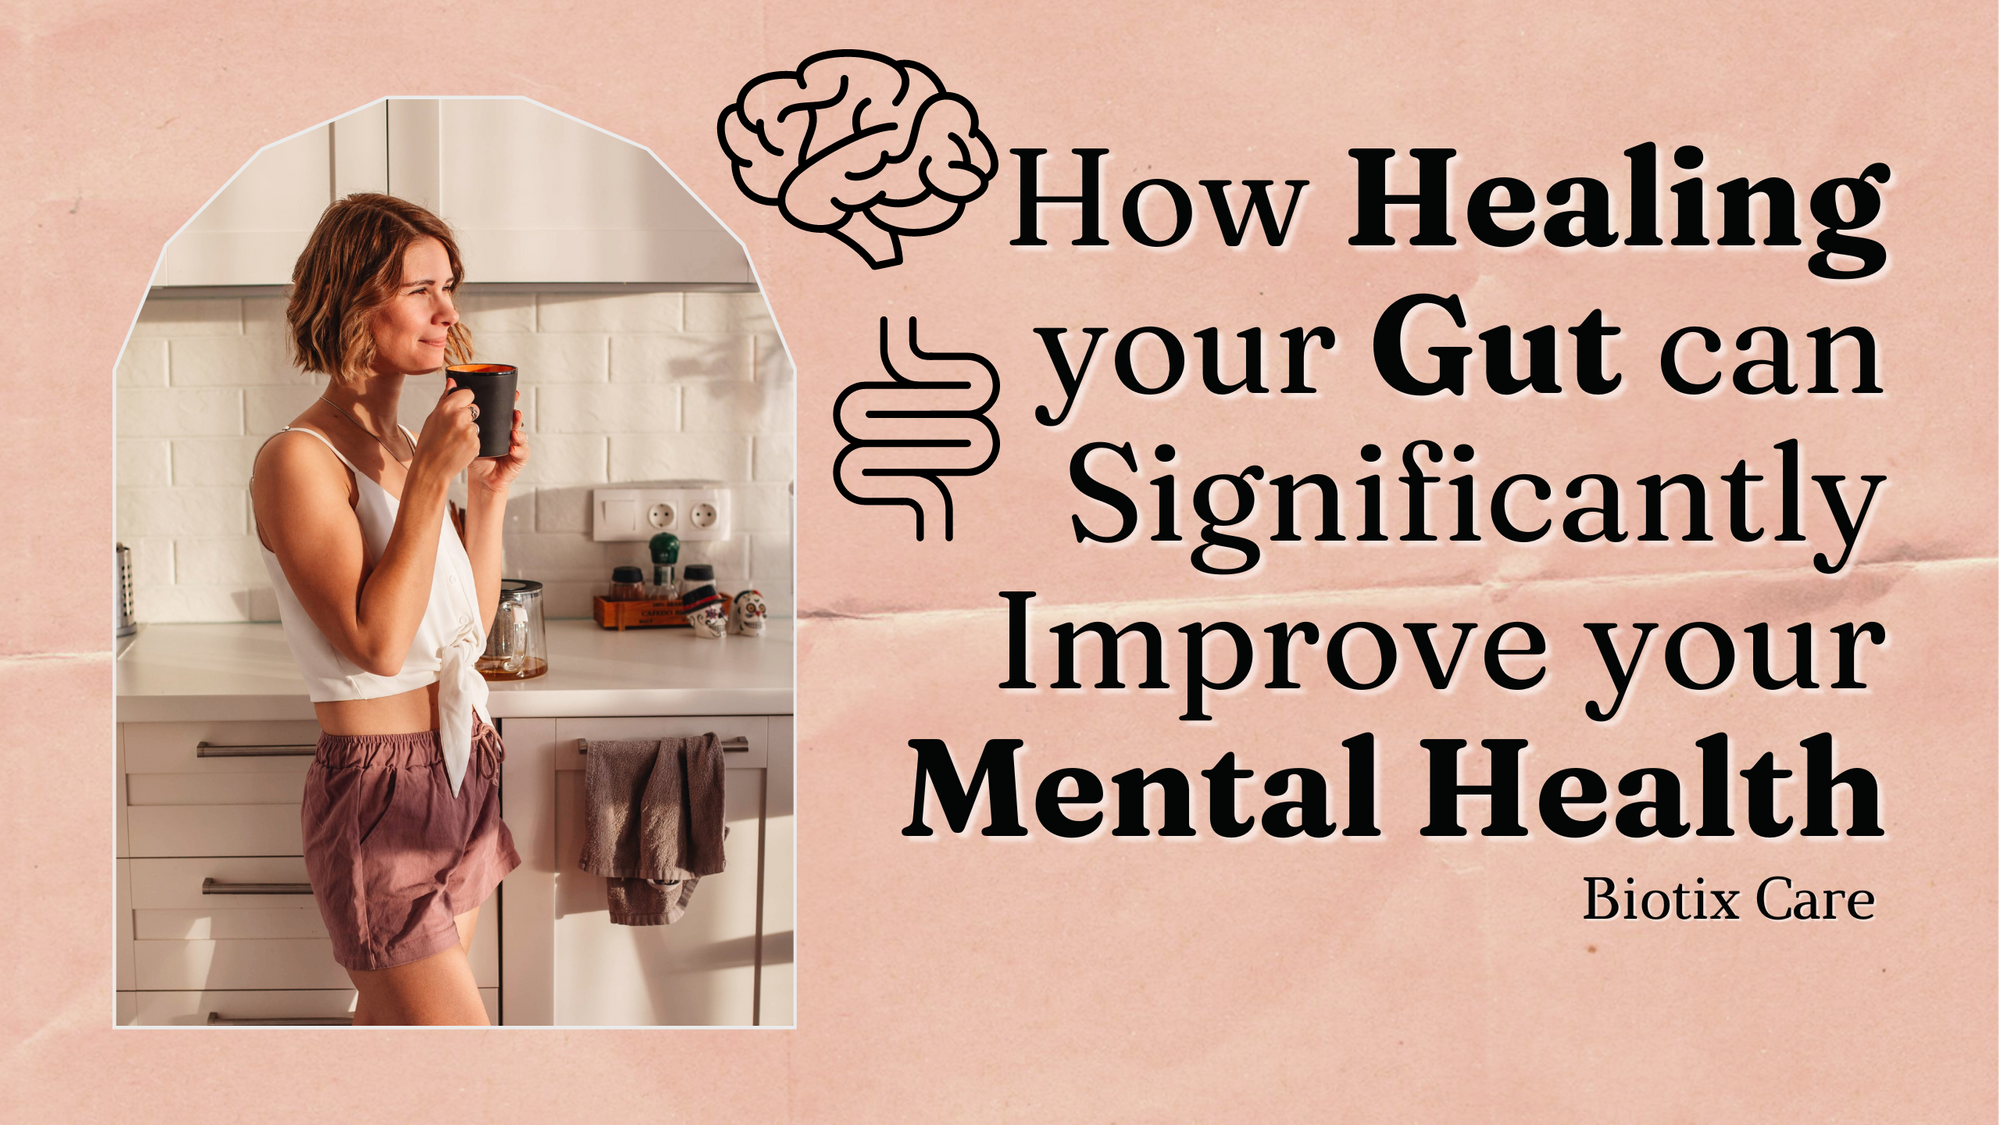 How healing your gut can significantly improve your mental health